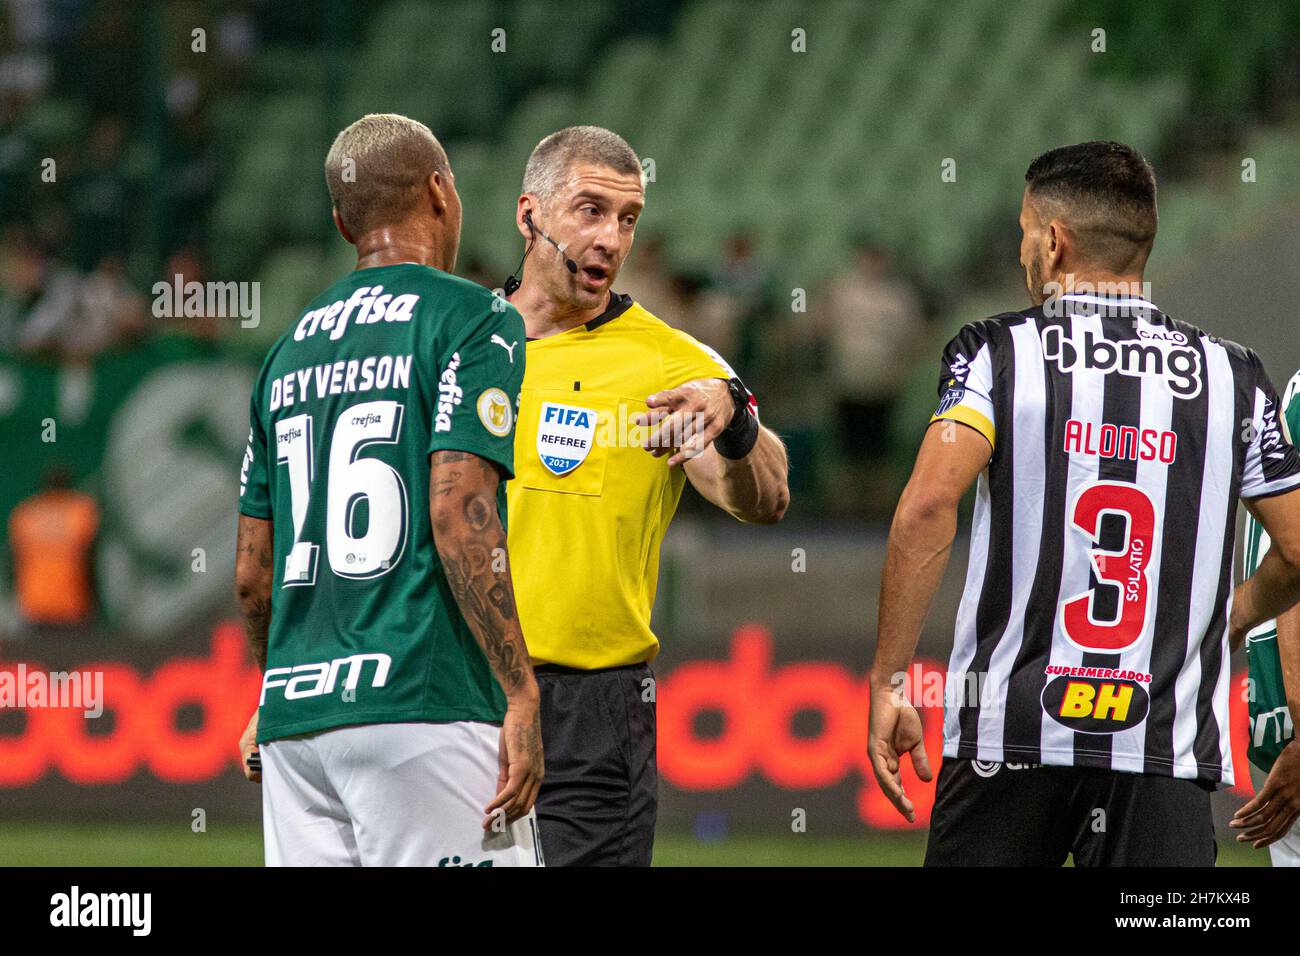 SÃO PAULO, SP - 23.11.2021: PALMEIRAS X ATLÉTICO MG - XXXXXXXXXXX in the match between Palmeiras X Atlético MG, valid for the 35th round of the 2021 Brazilian Championship Serie A, held at Allianz Parque, in São Paulo, capital, this Tuesday night, November 23, 2021. (Photo: Van Campos/Fotoarena) Stock Photo